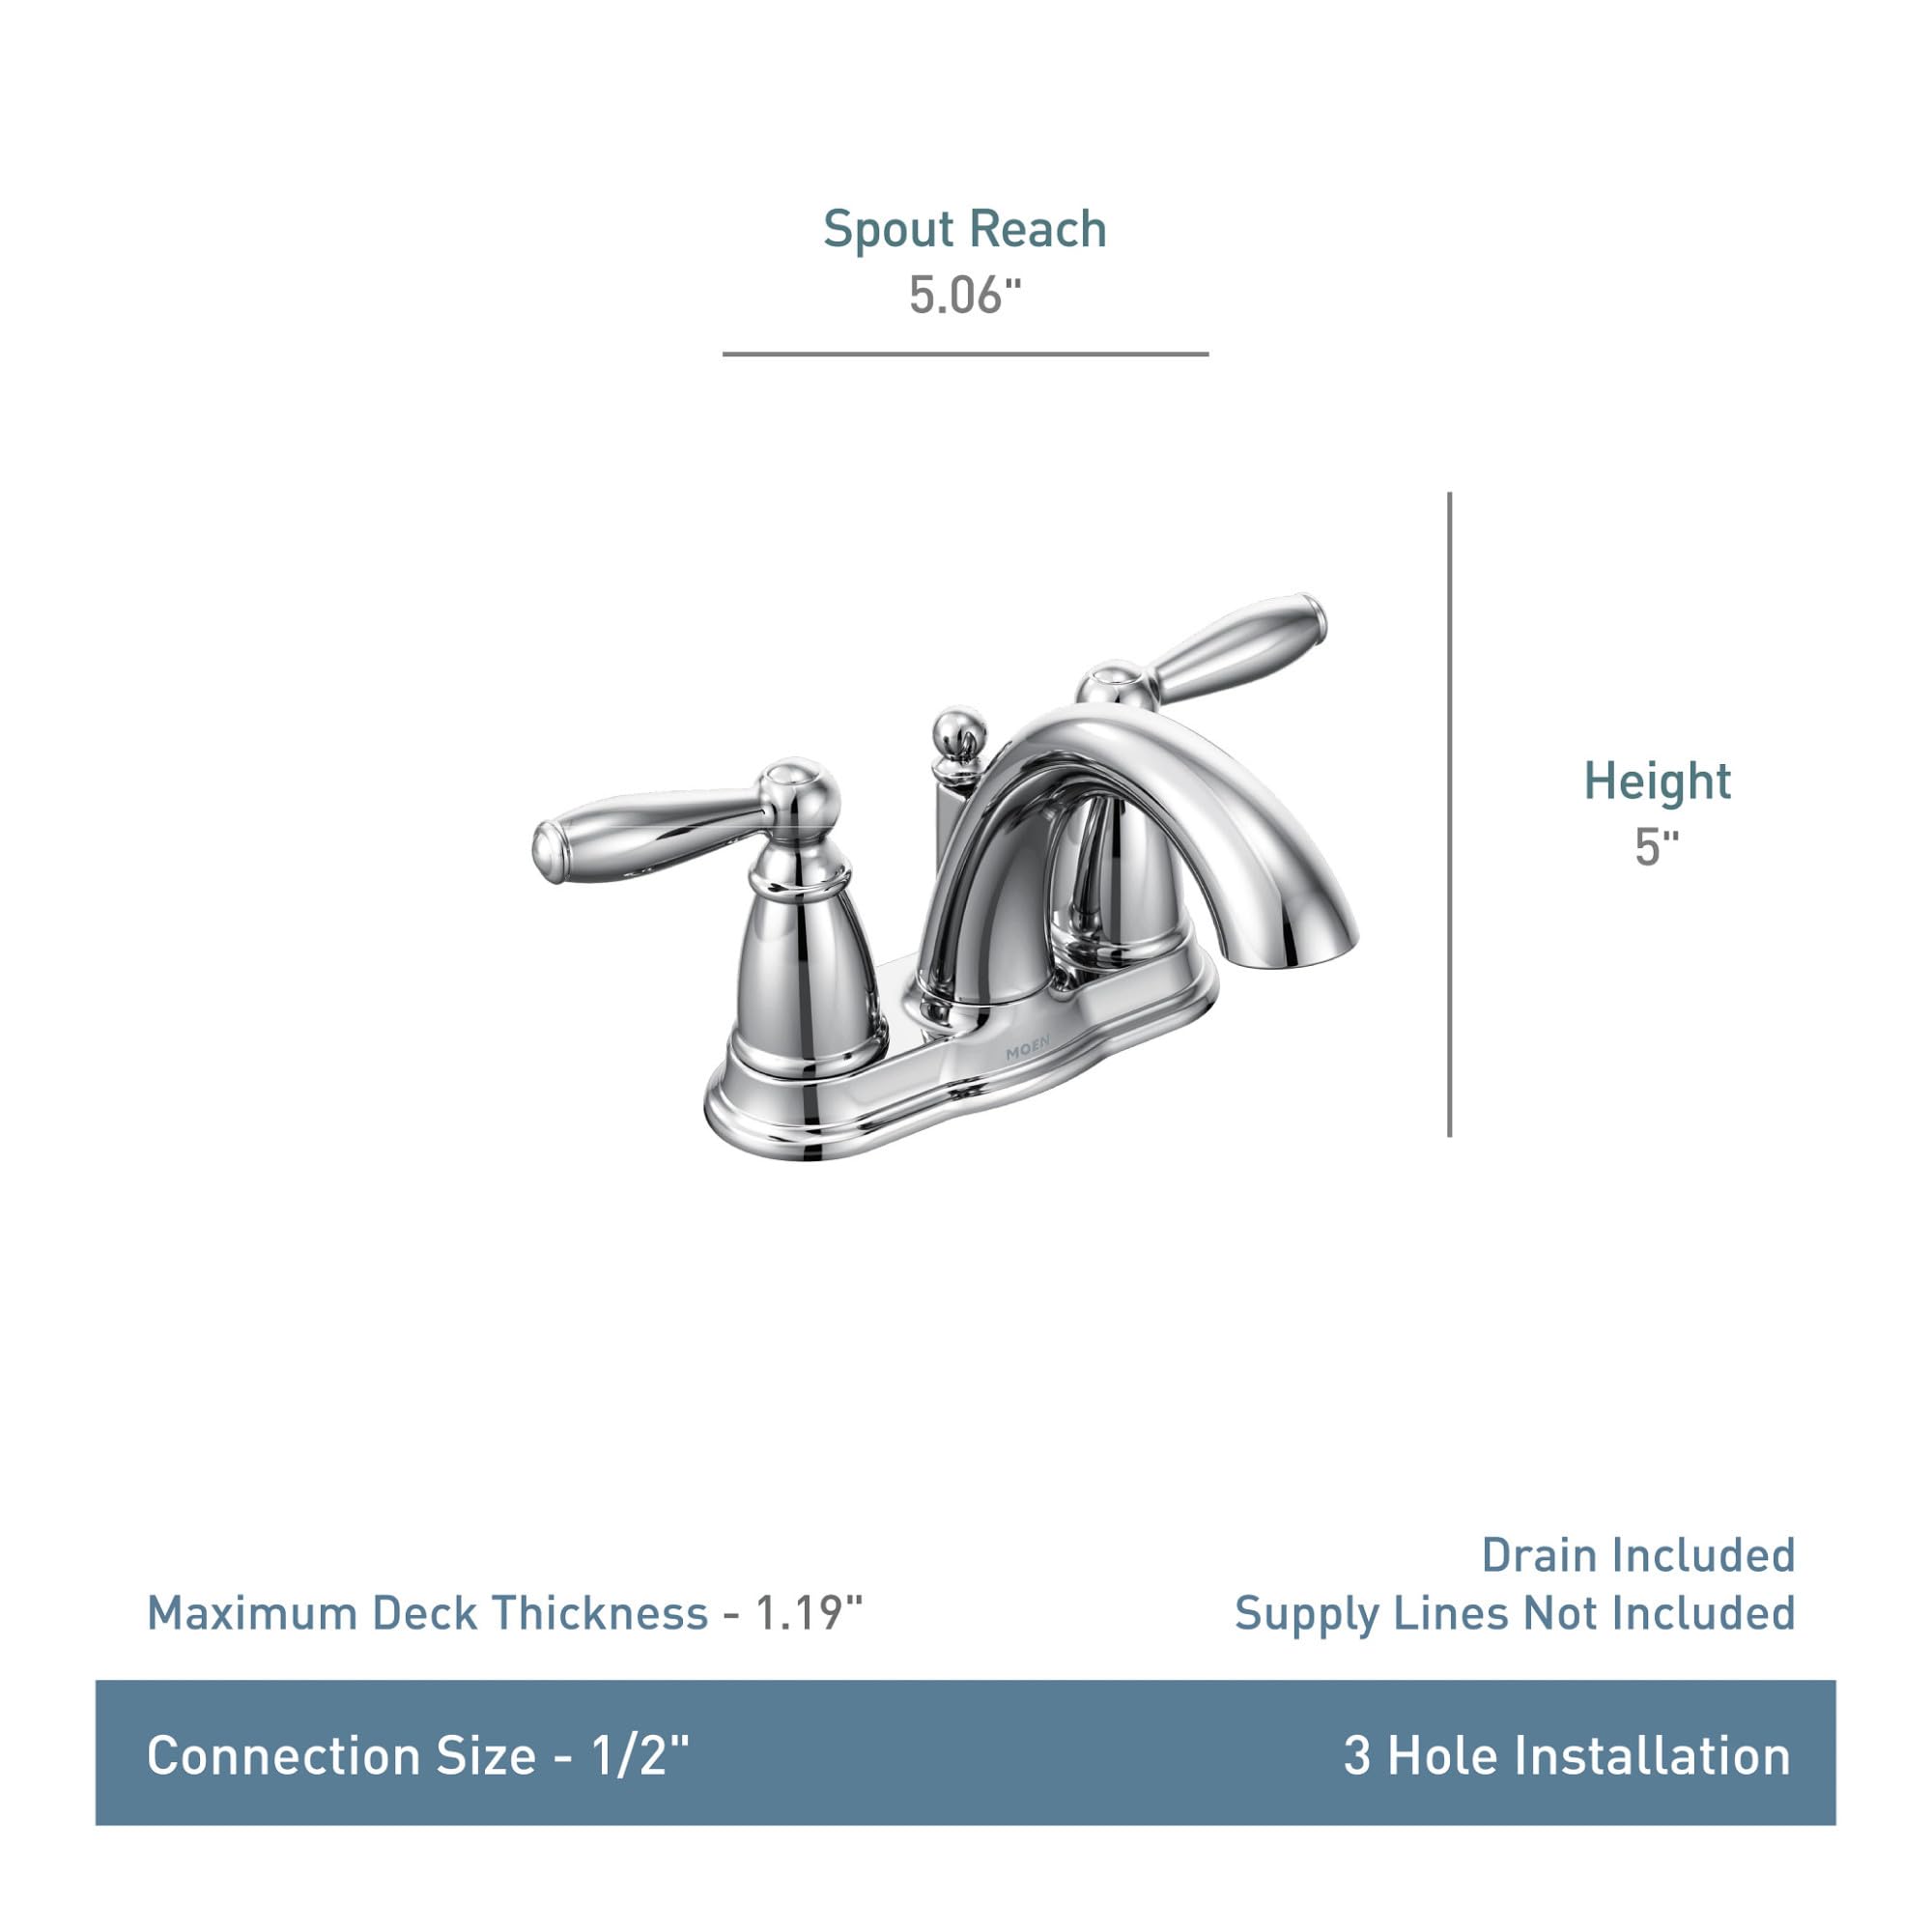 Moen Brantford Brushed Nickel Two-Handle Low-Arc Centerset Bathroom Faucet with Drain Assembly, 6610BN